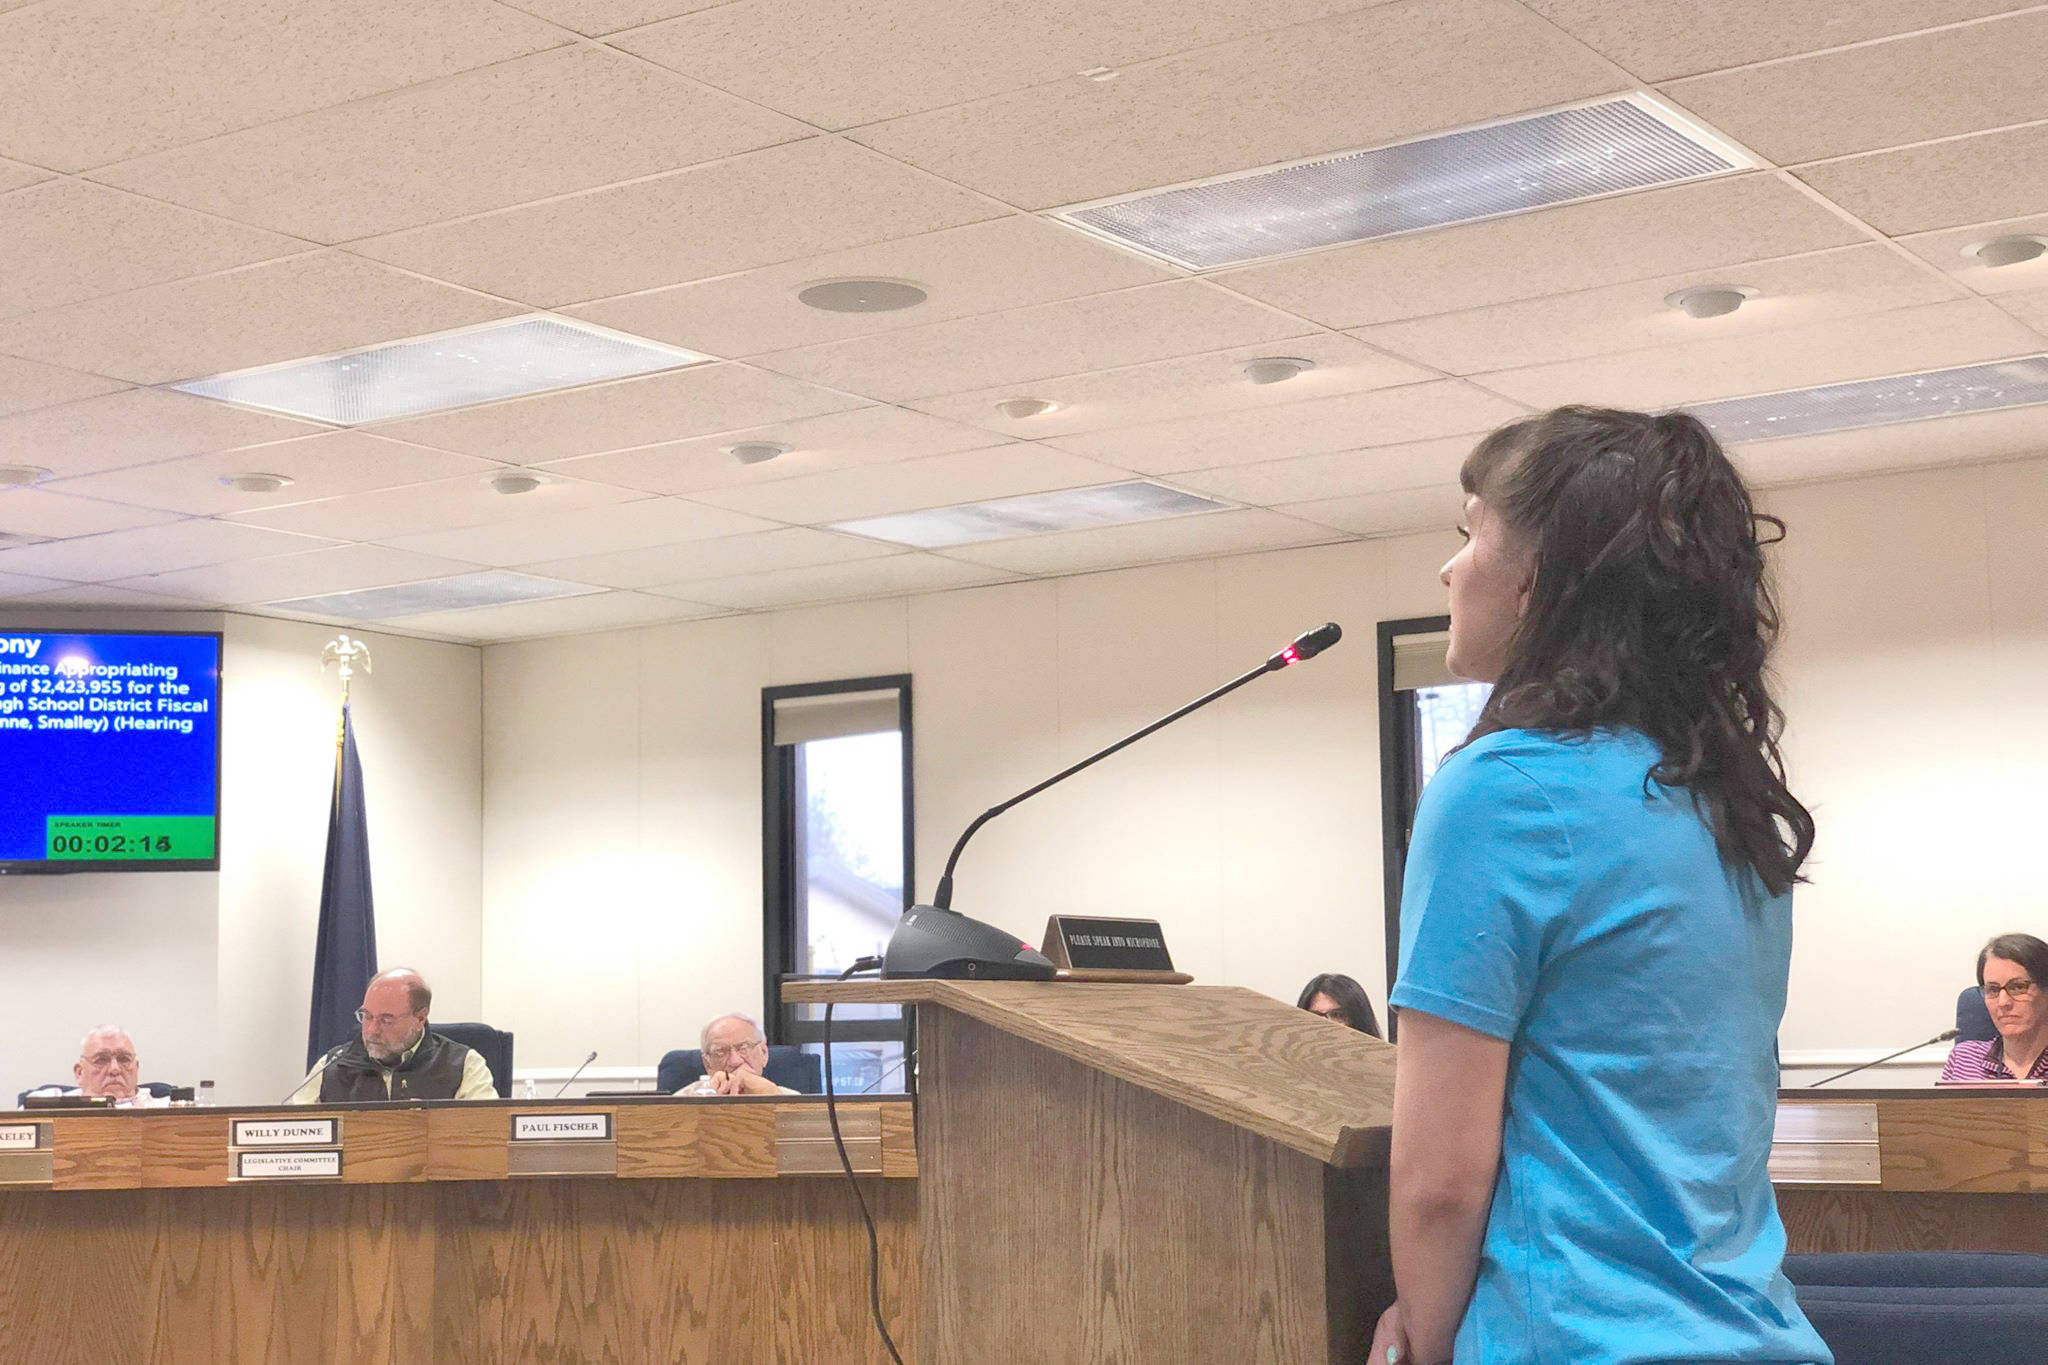 First-year Chapman School teacher Malia Larson speaks to the Kenai Peninsula Borough Assembly in support of an ordinance that will appropriate around $2.4 million to the school district in hopes of retaining some non-tenured teachers for the next school year, in Soldotna, Alaska, on Tuesday, April 2, 2019. (Photo by Victoria Petersen/Peninsula Clarion)